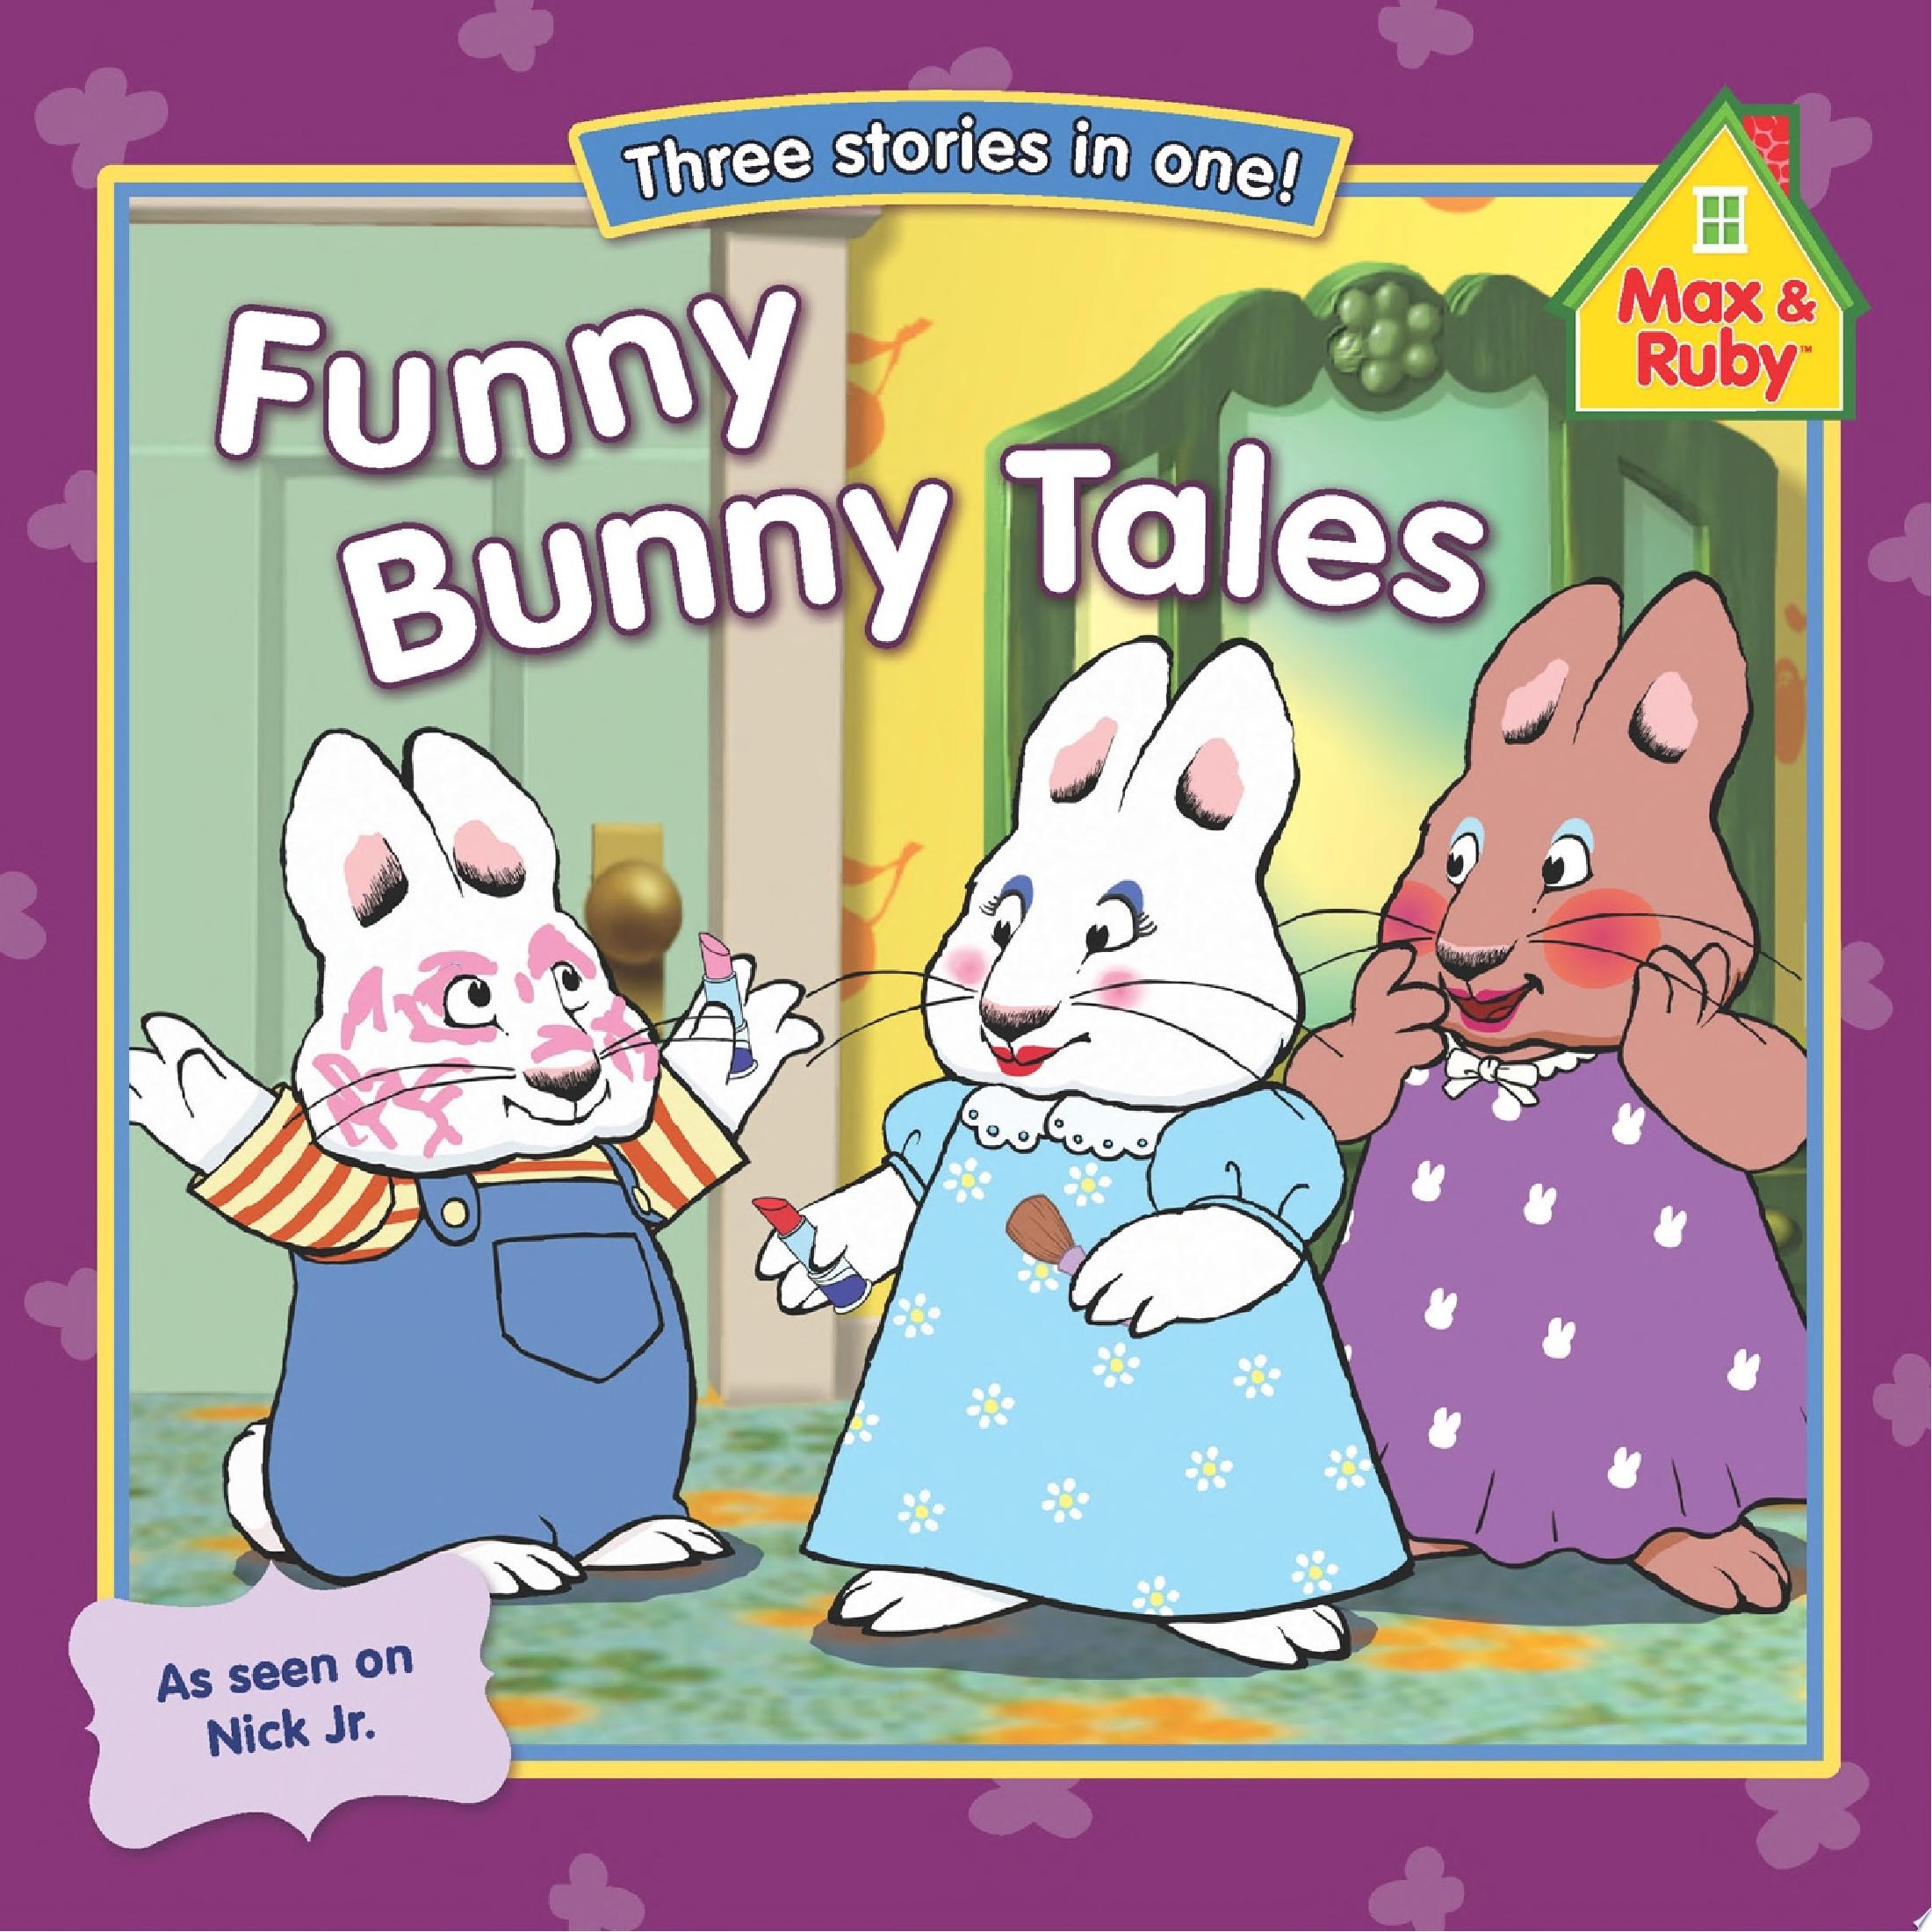 Image for "Funny Bunny Tales"